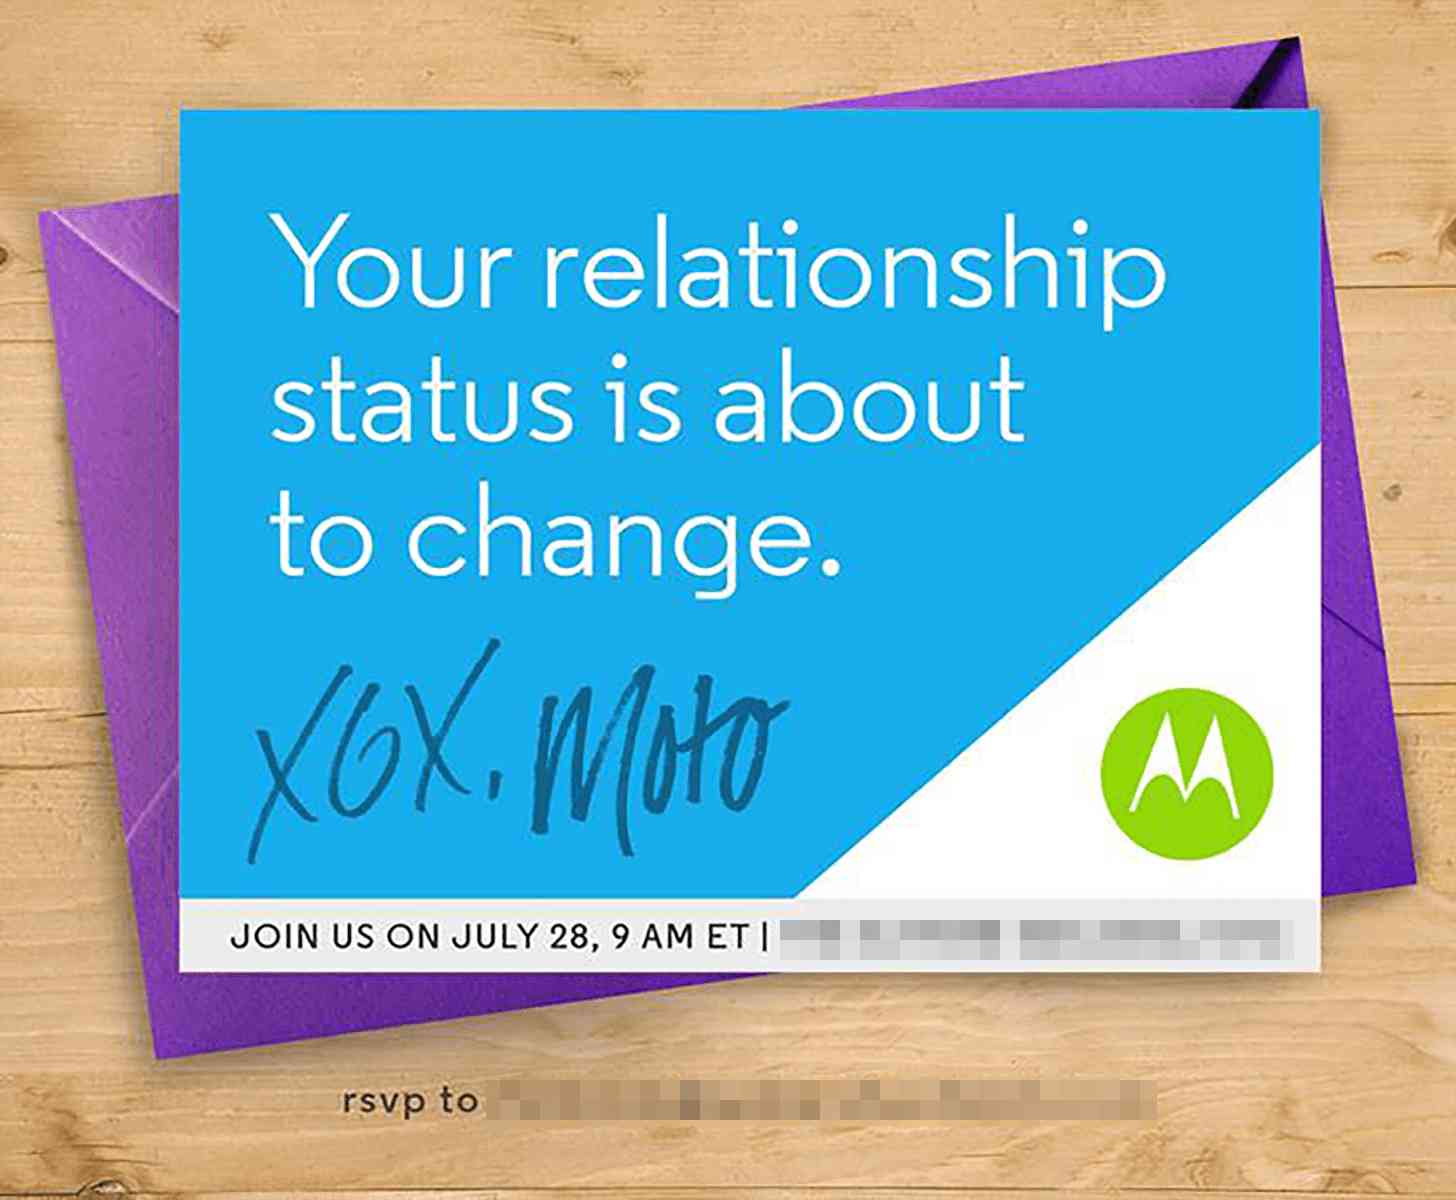 Motorola event July 28 relationship status is about to change